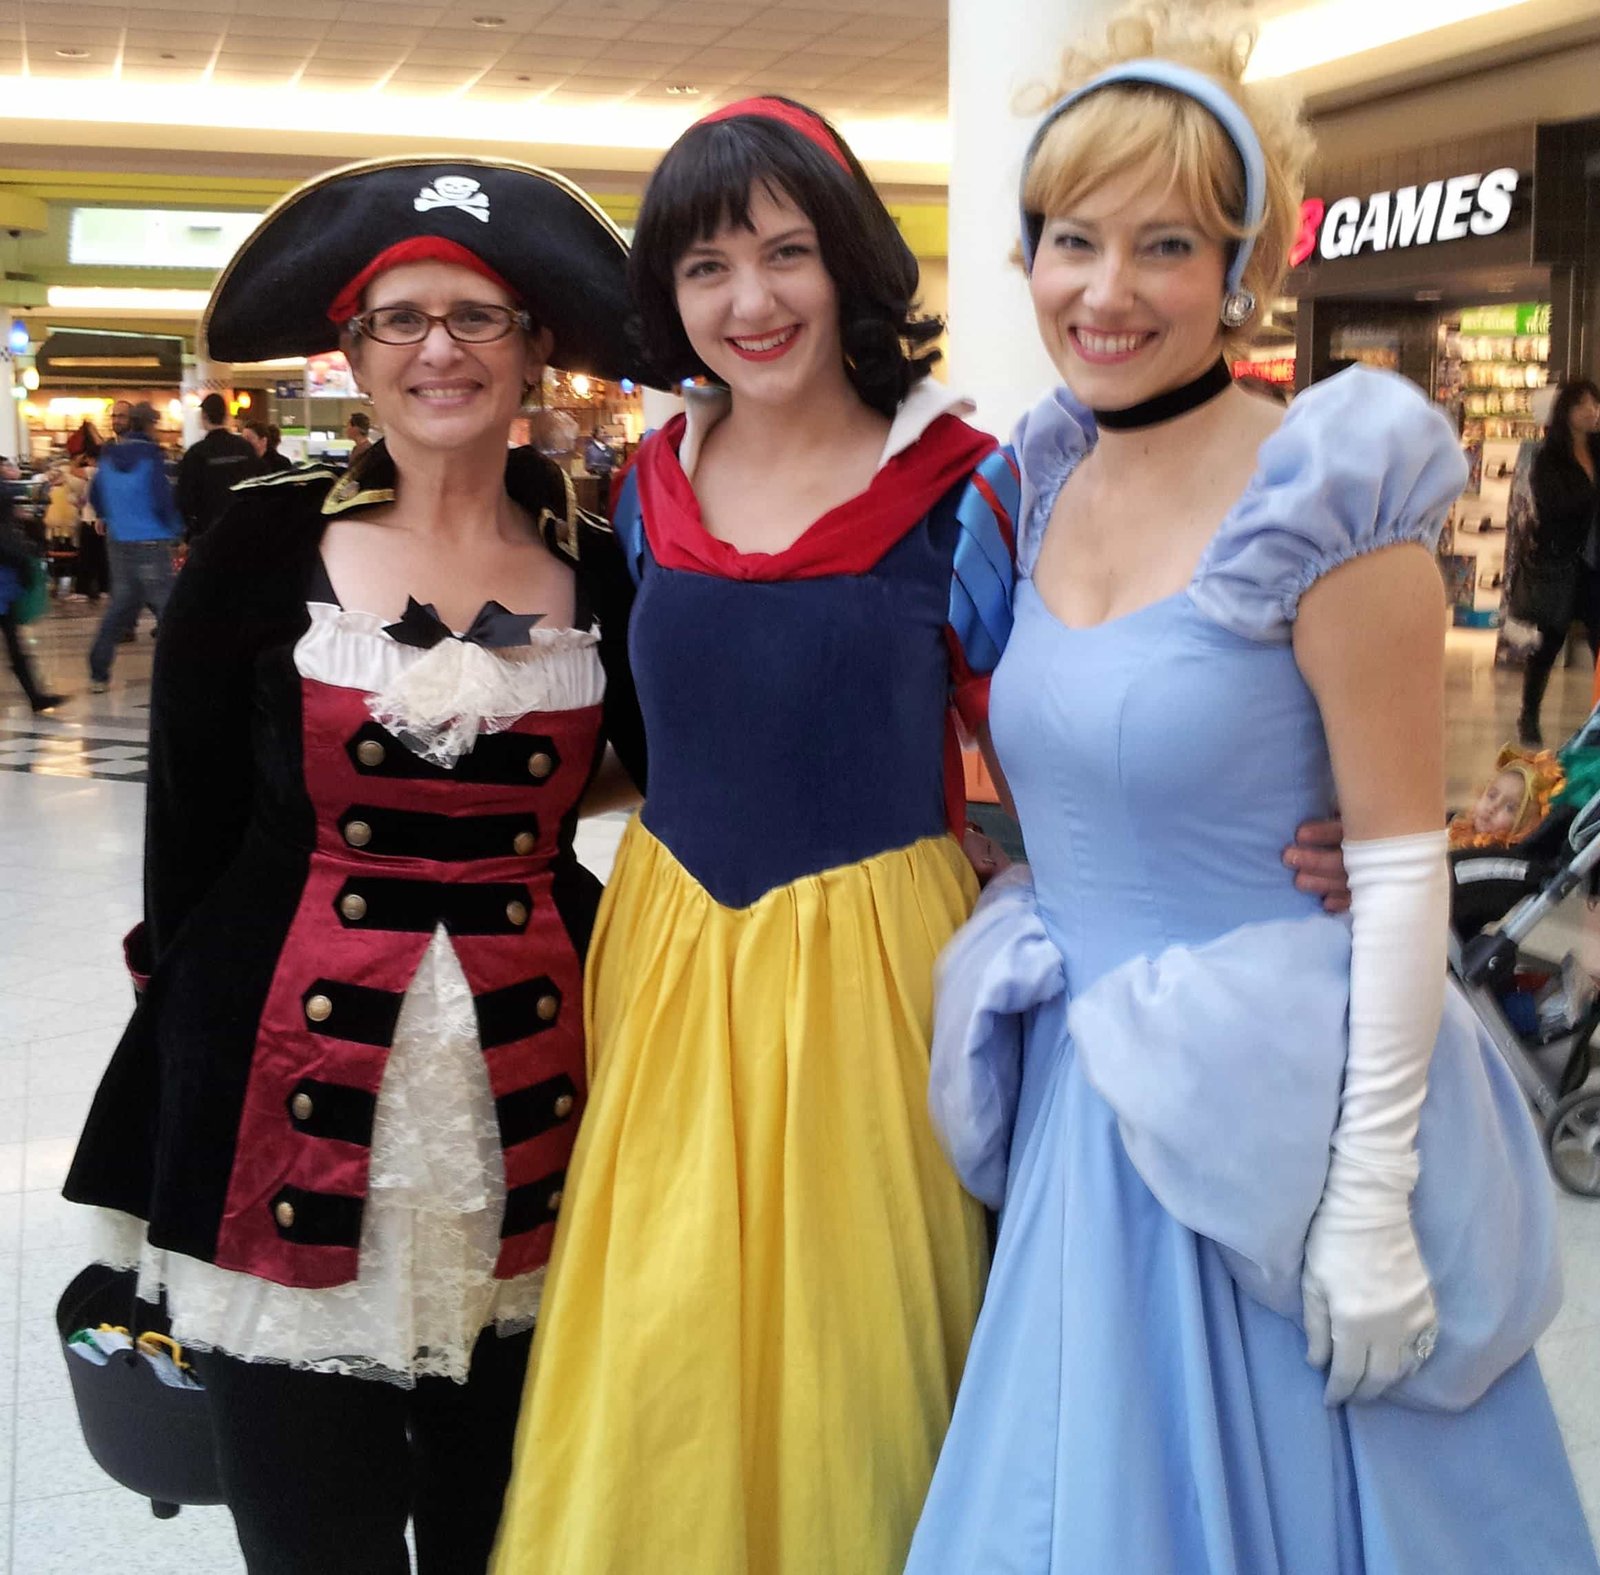 Princess Snow White and Princess Cinderella with their favorite Lady Pirate Arghh!